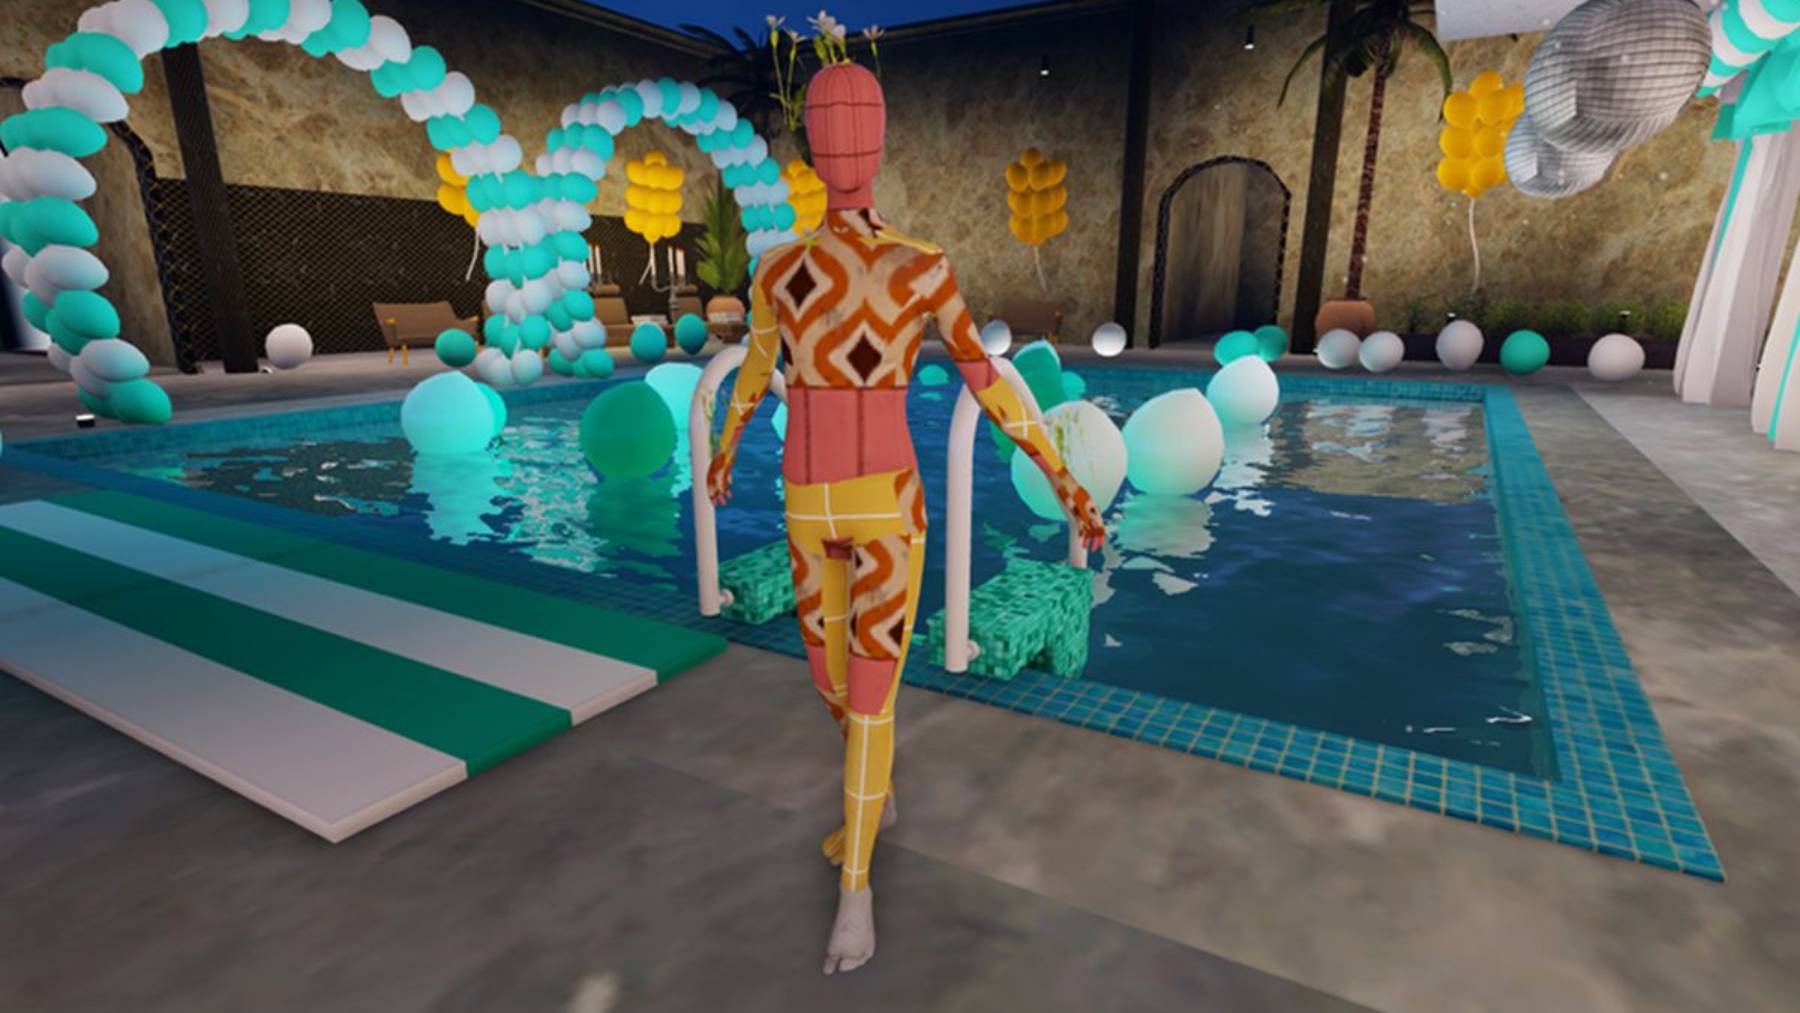 A figure covered in a graphic print stands in front of a pool in a digital image.